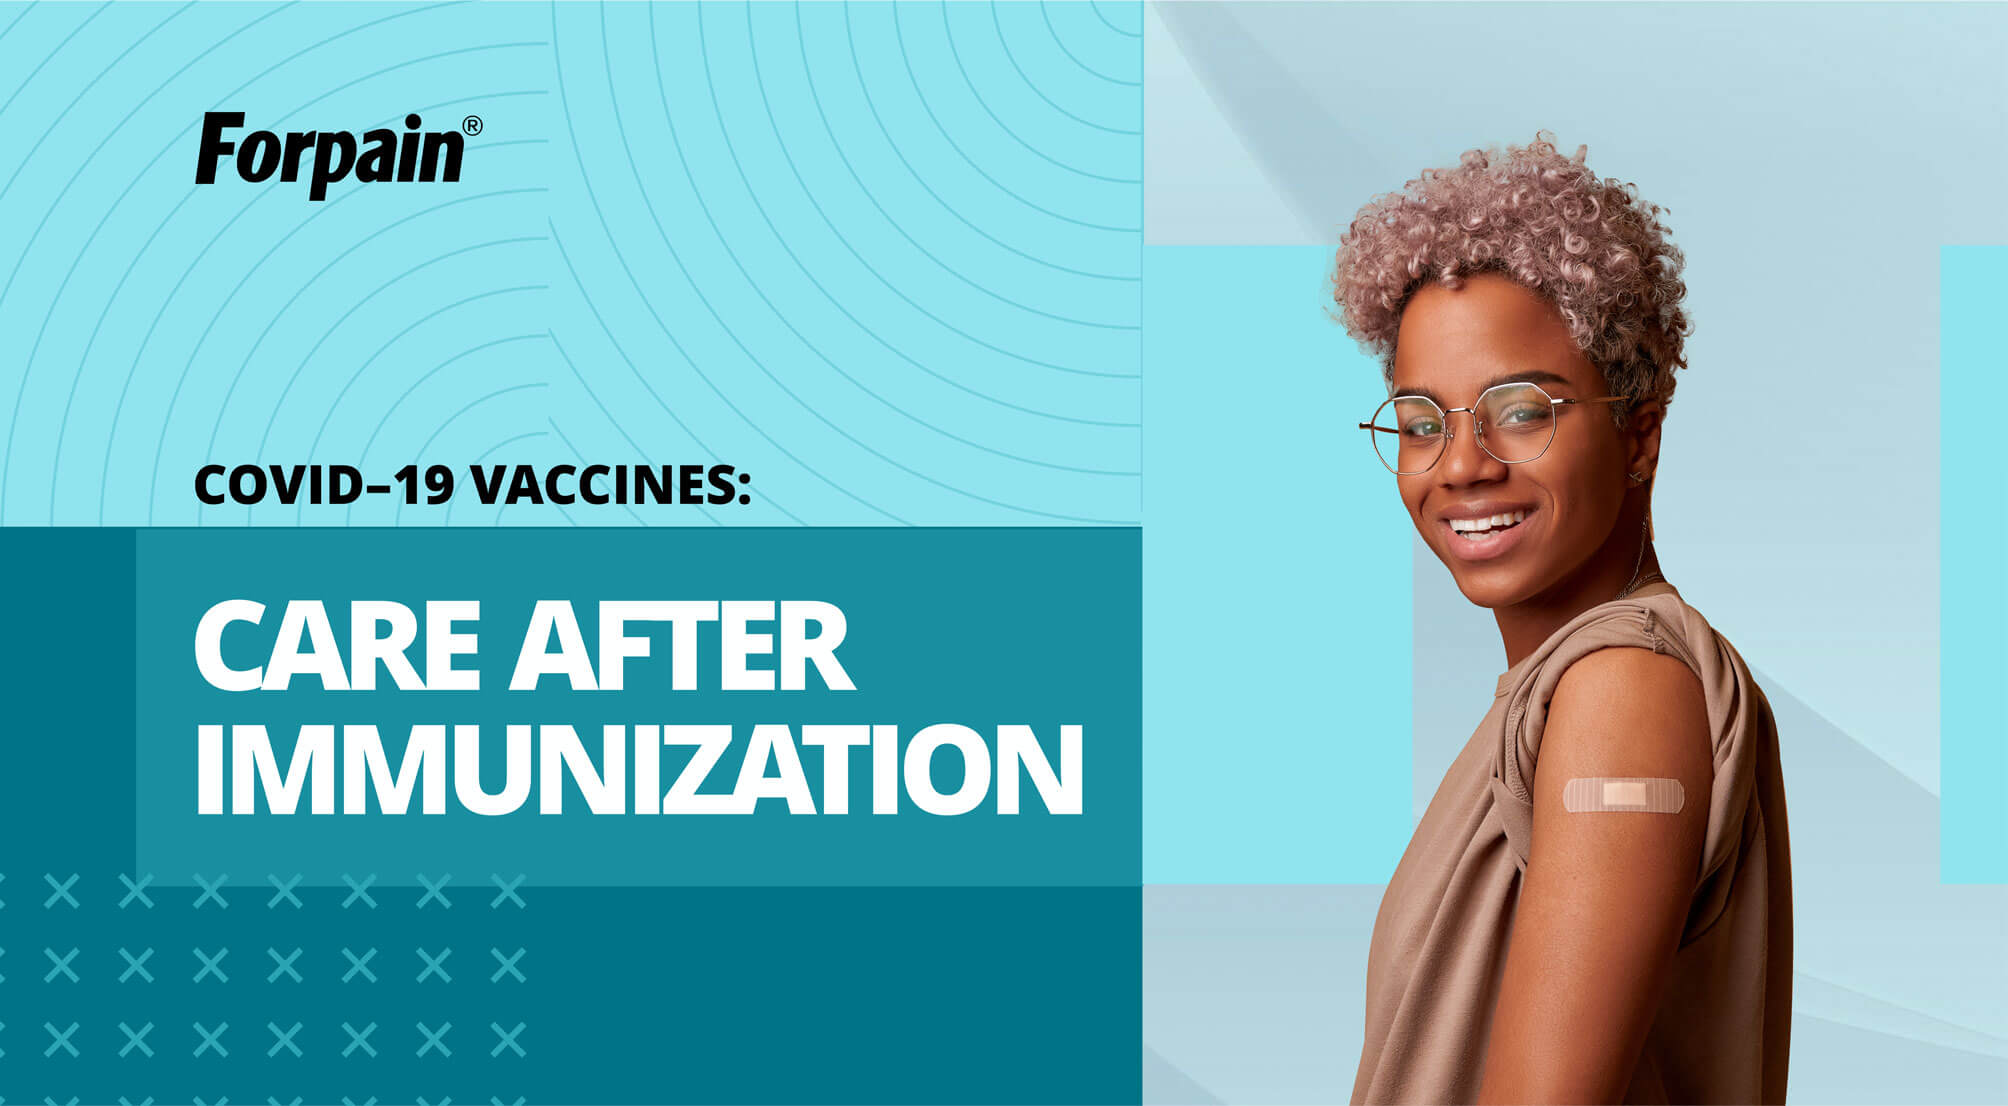 COVID-19 Vaccines Care After Immunization